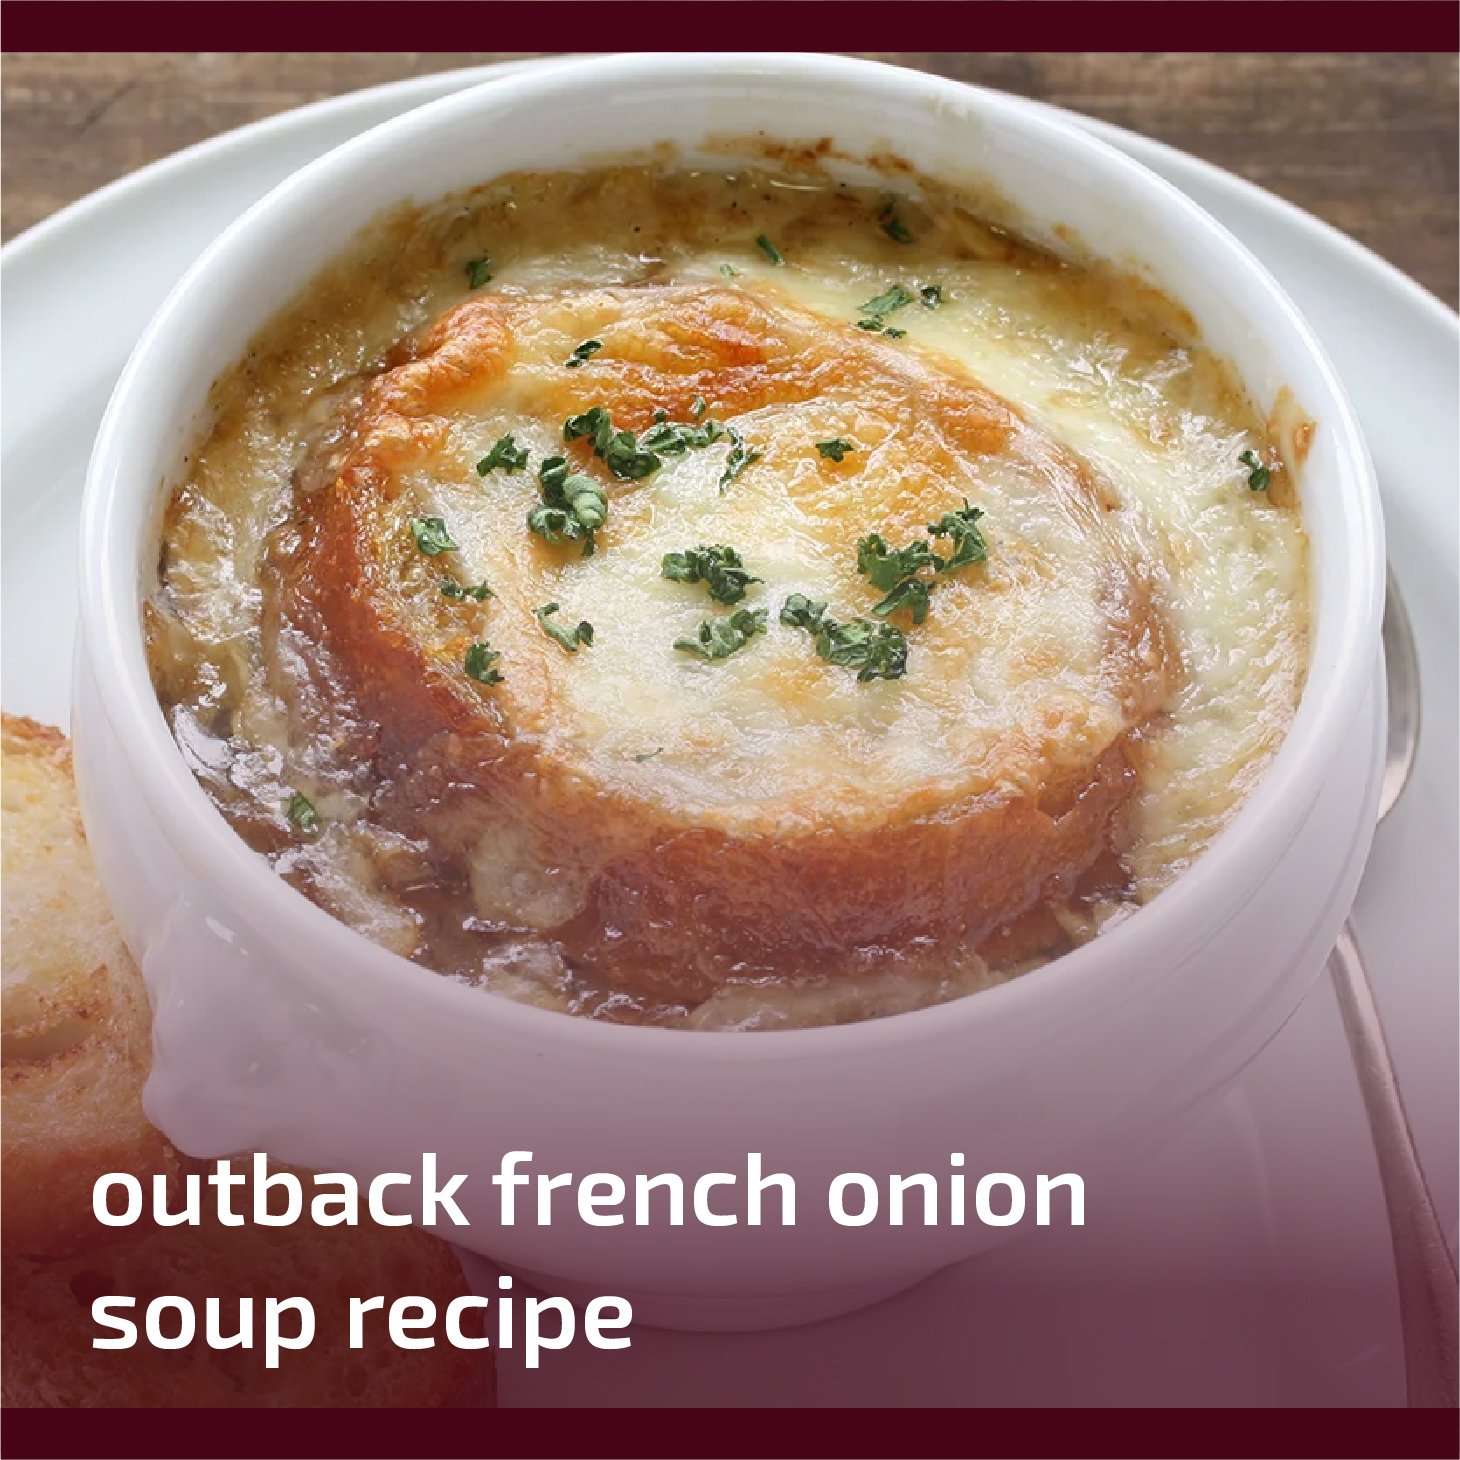 Master The Art Of Making Outback French Onion Soup Recipe At Home